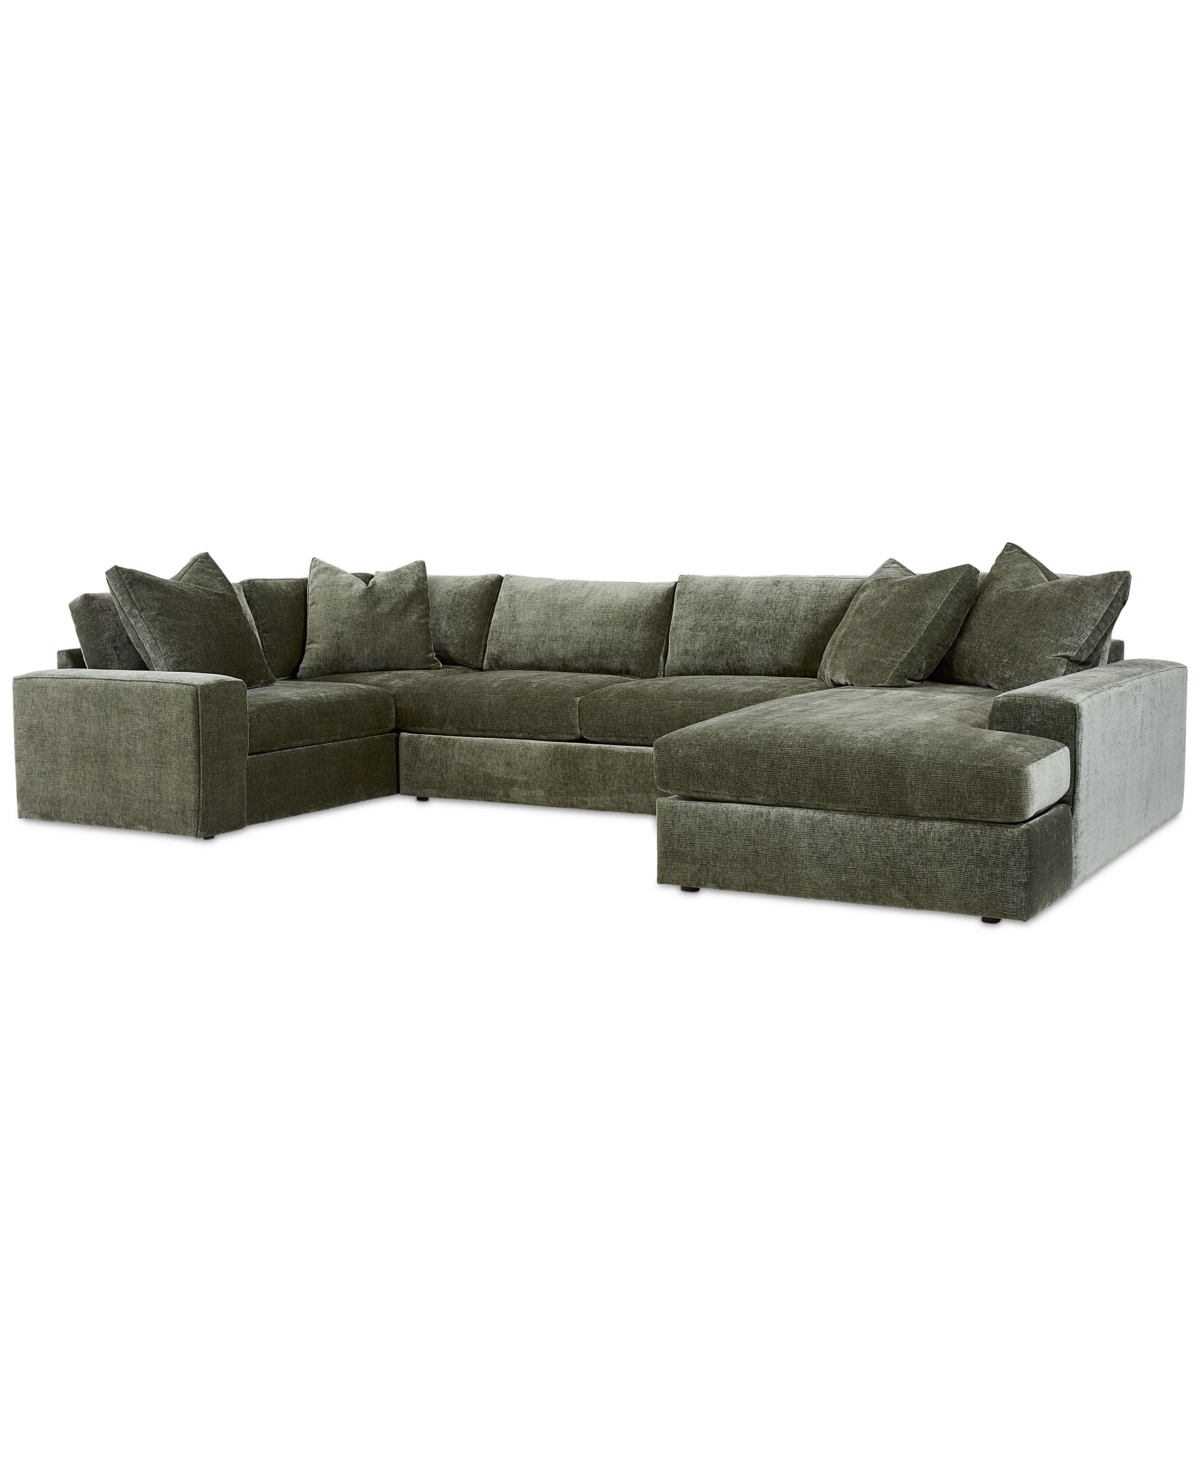 Furniture Michola 155" 3-pc. Fabric Sectional With Chaise, Created For Macy's In Zion Forest